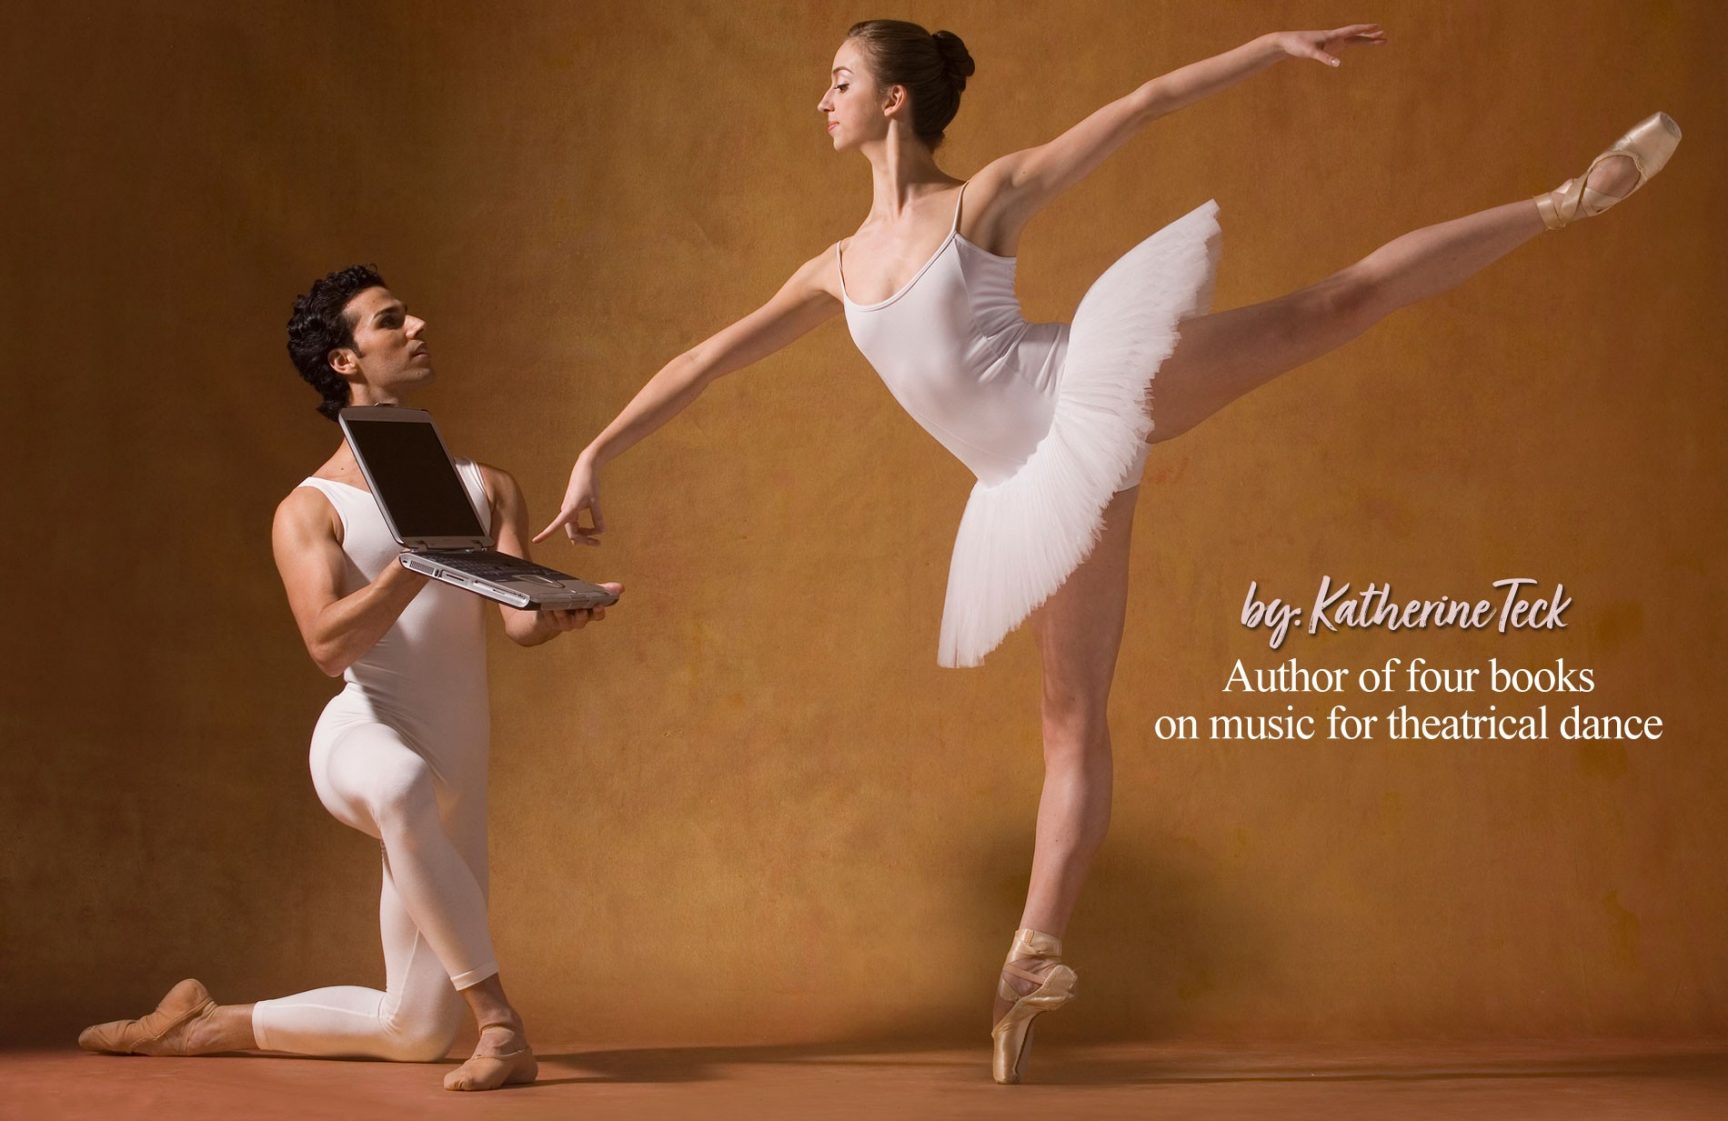 Appreciating Ballet's Music - by Katherine Teck